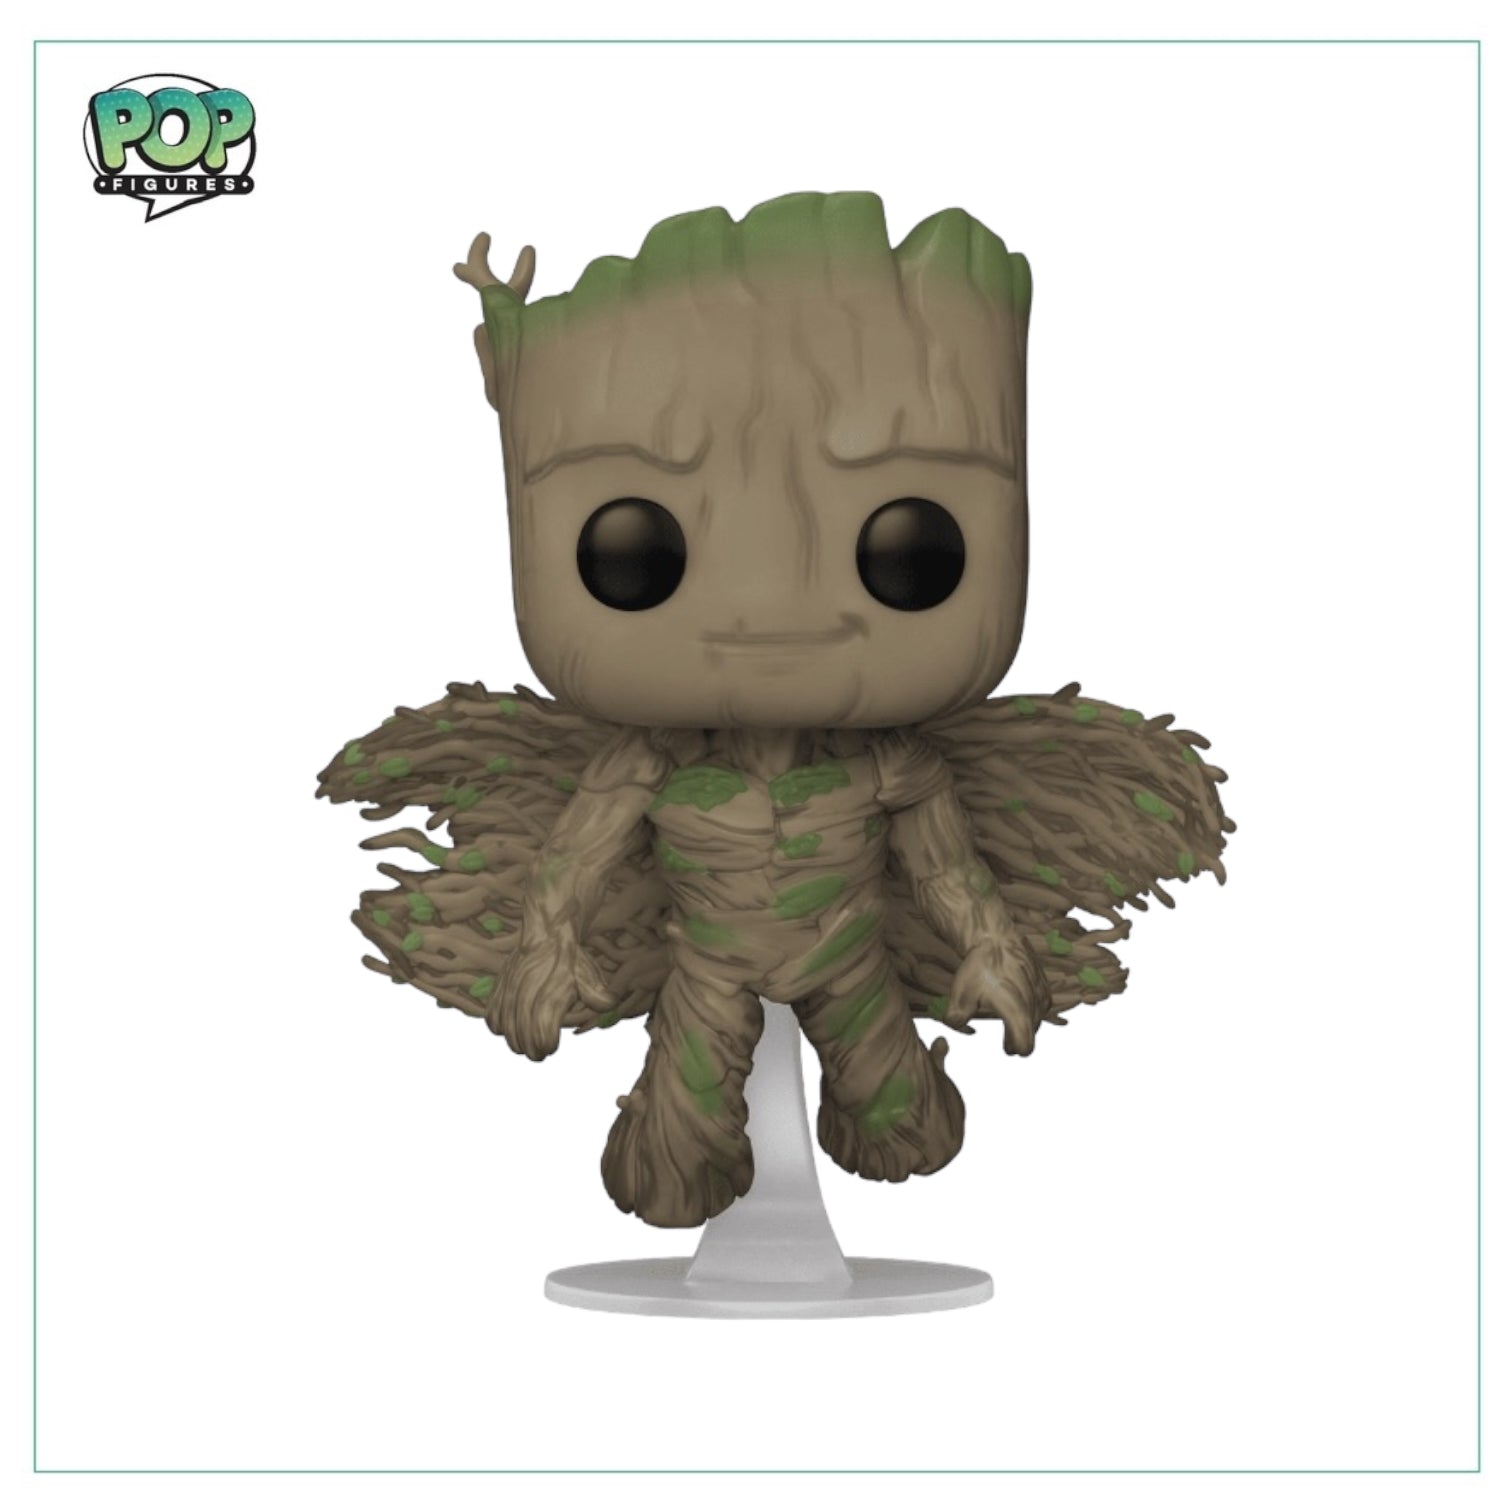 Groot #1213 (w/ Wings) Funko Pop! - Guardians of the Galaxy Volume 3 - Funko Shop Exclusive